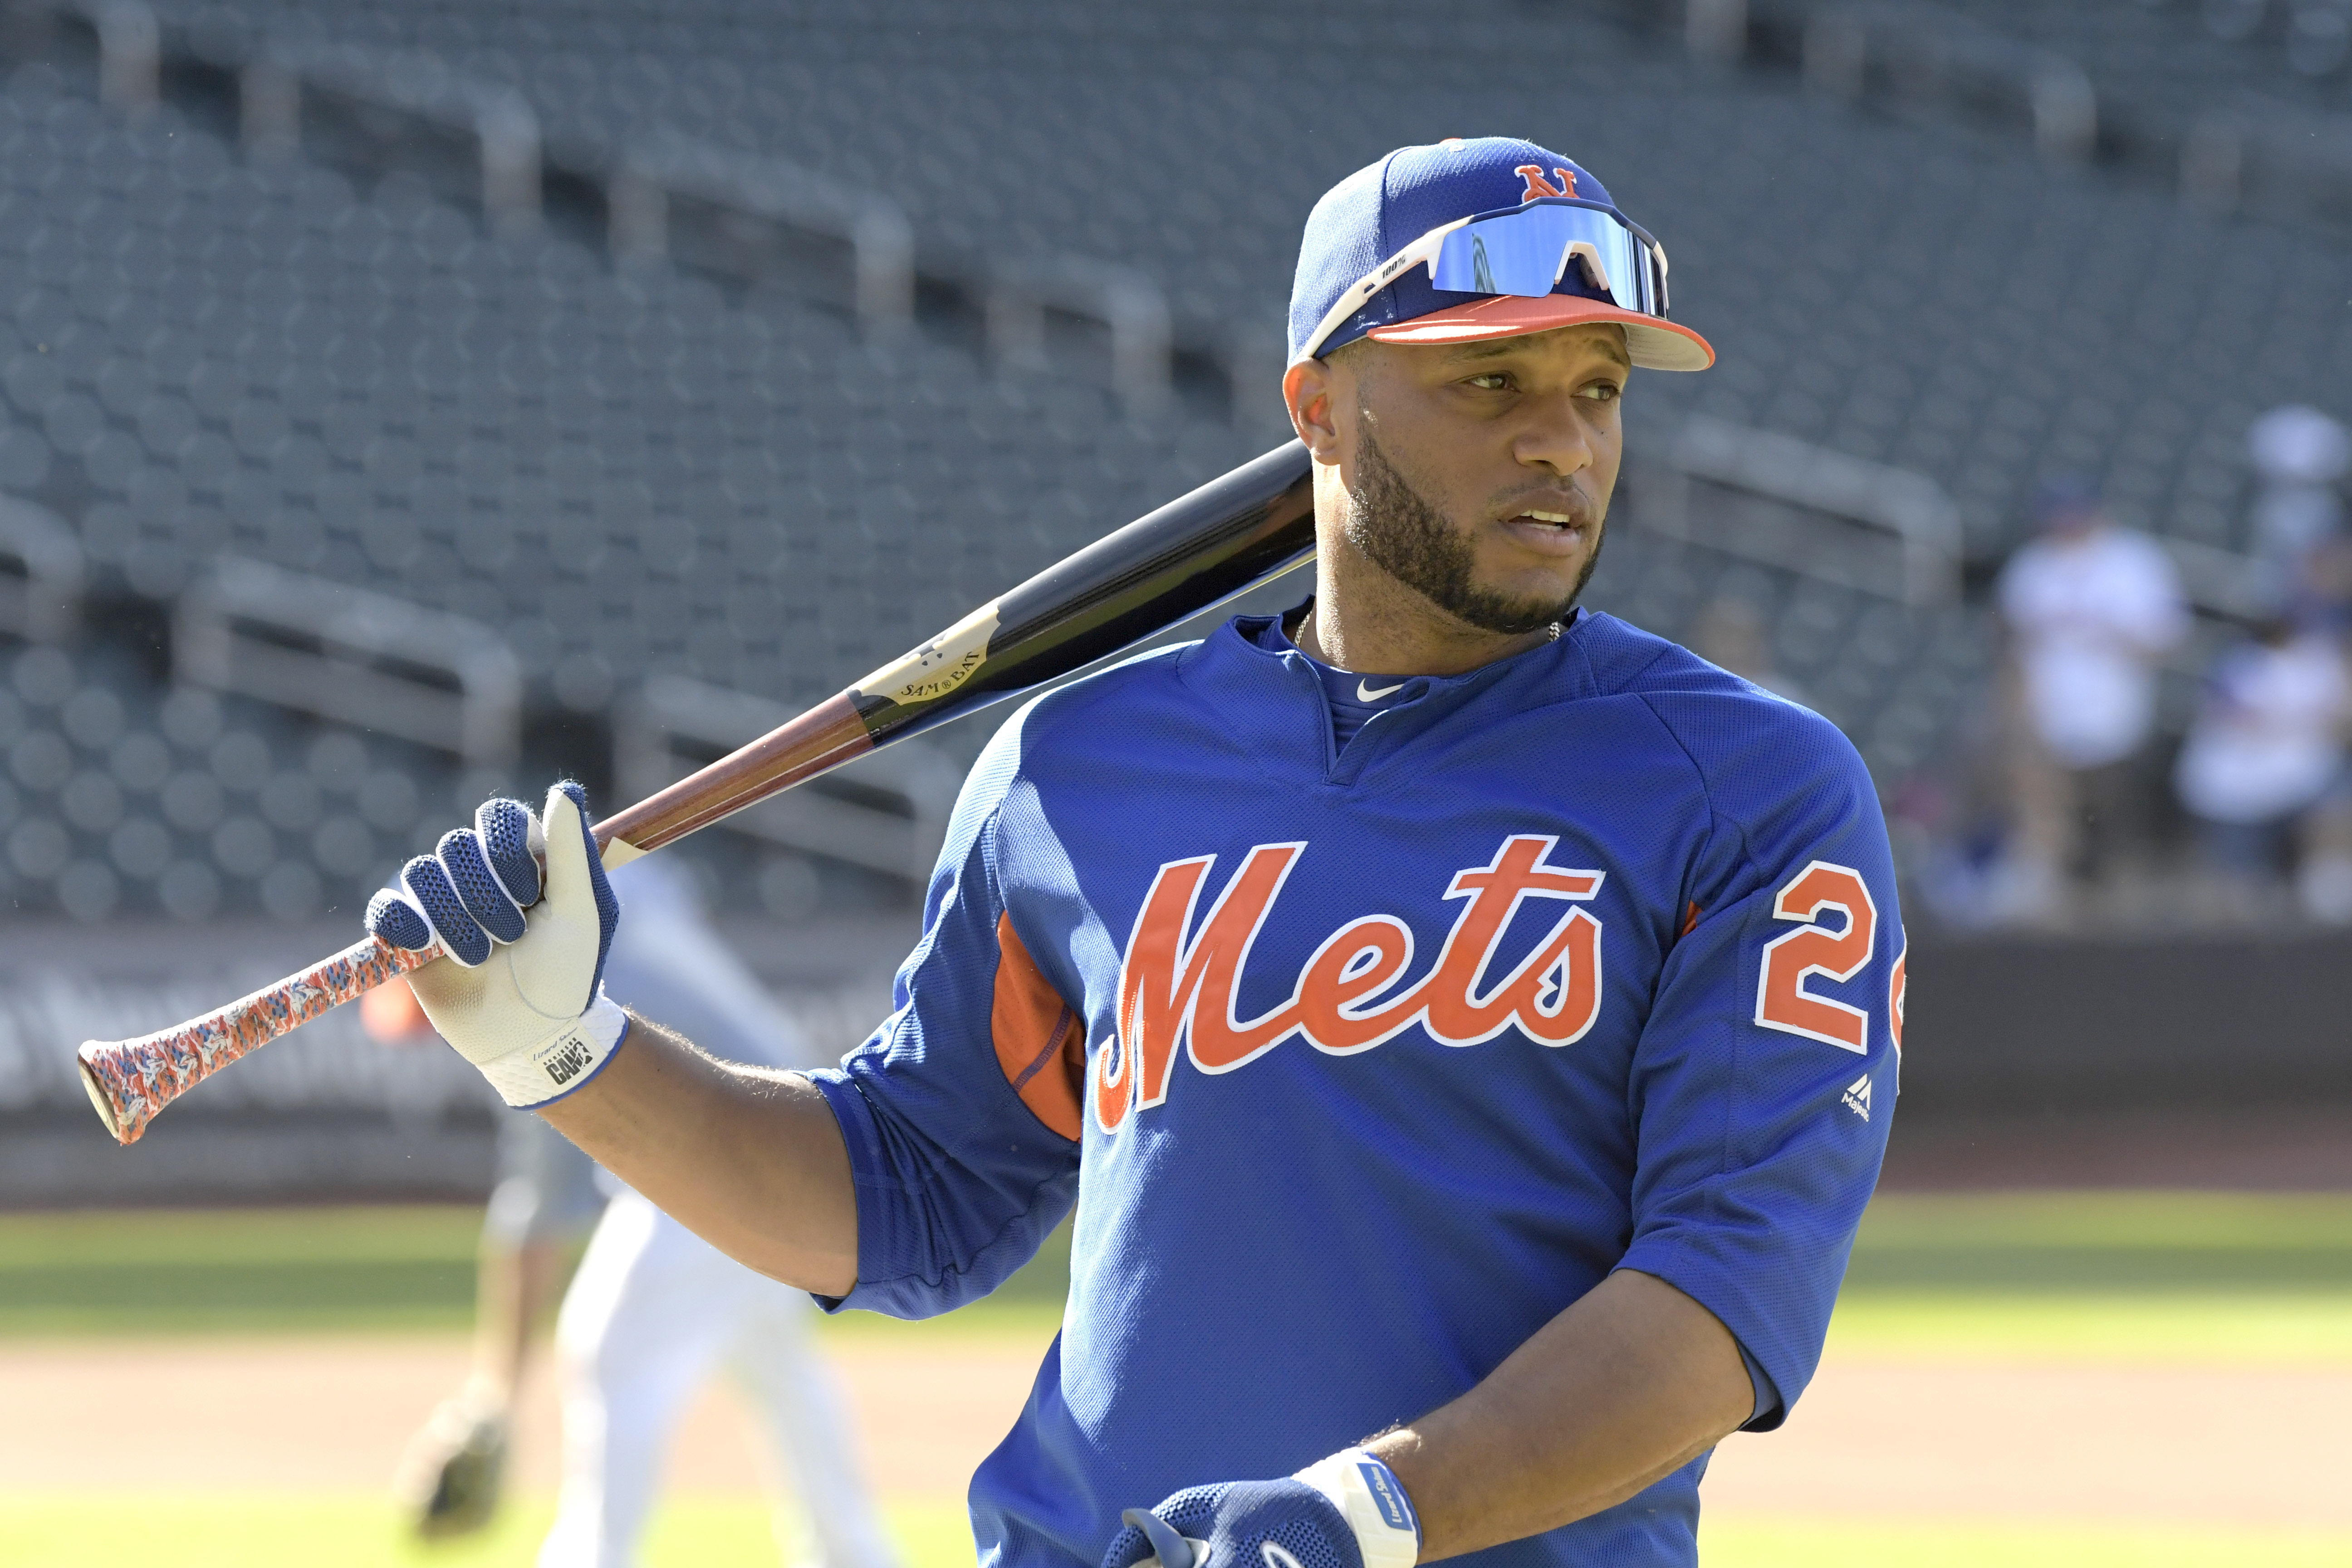 Robinson Cano's bat does its damage to Astros again